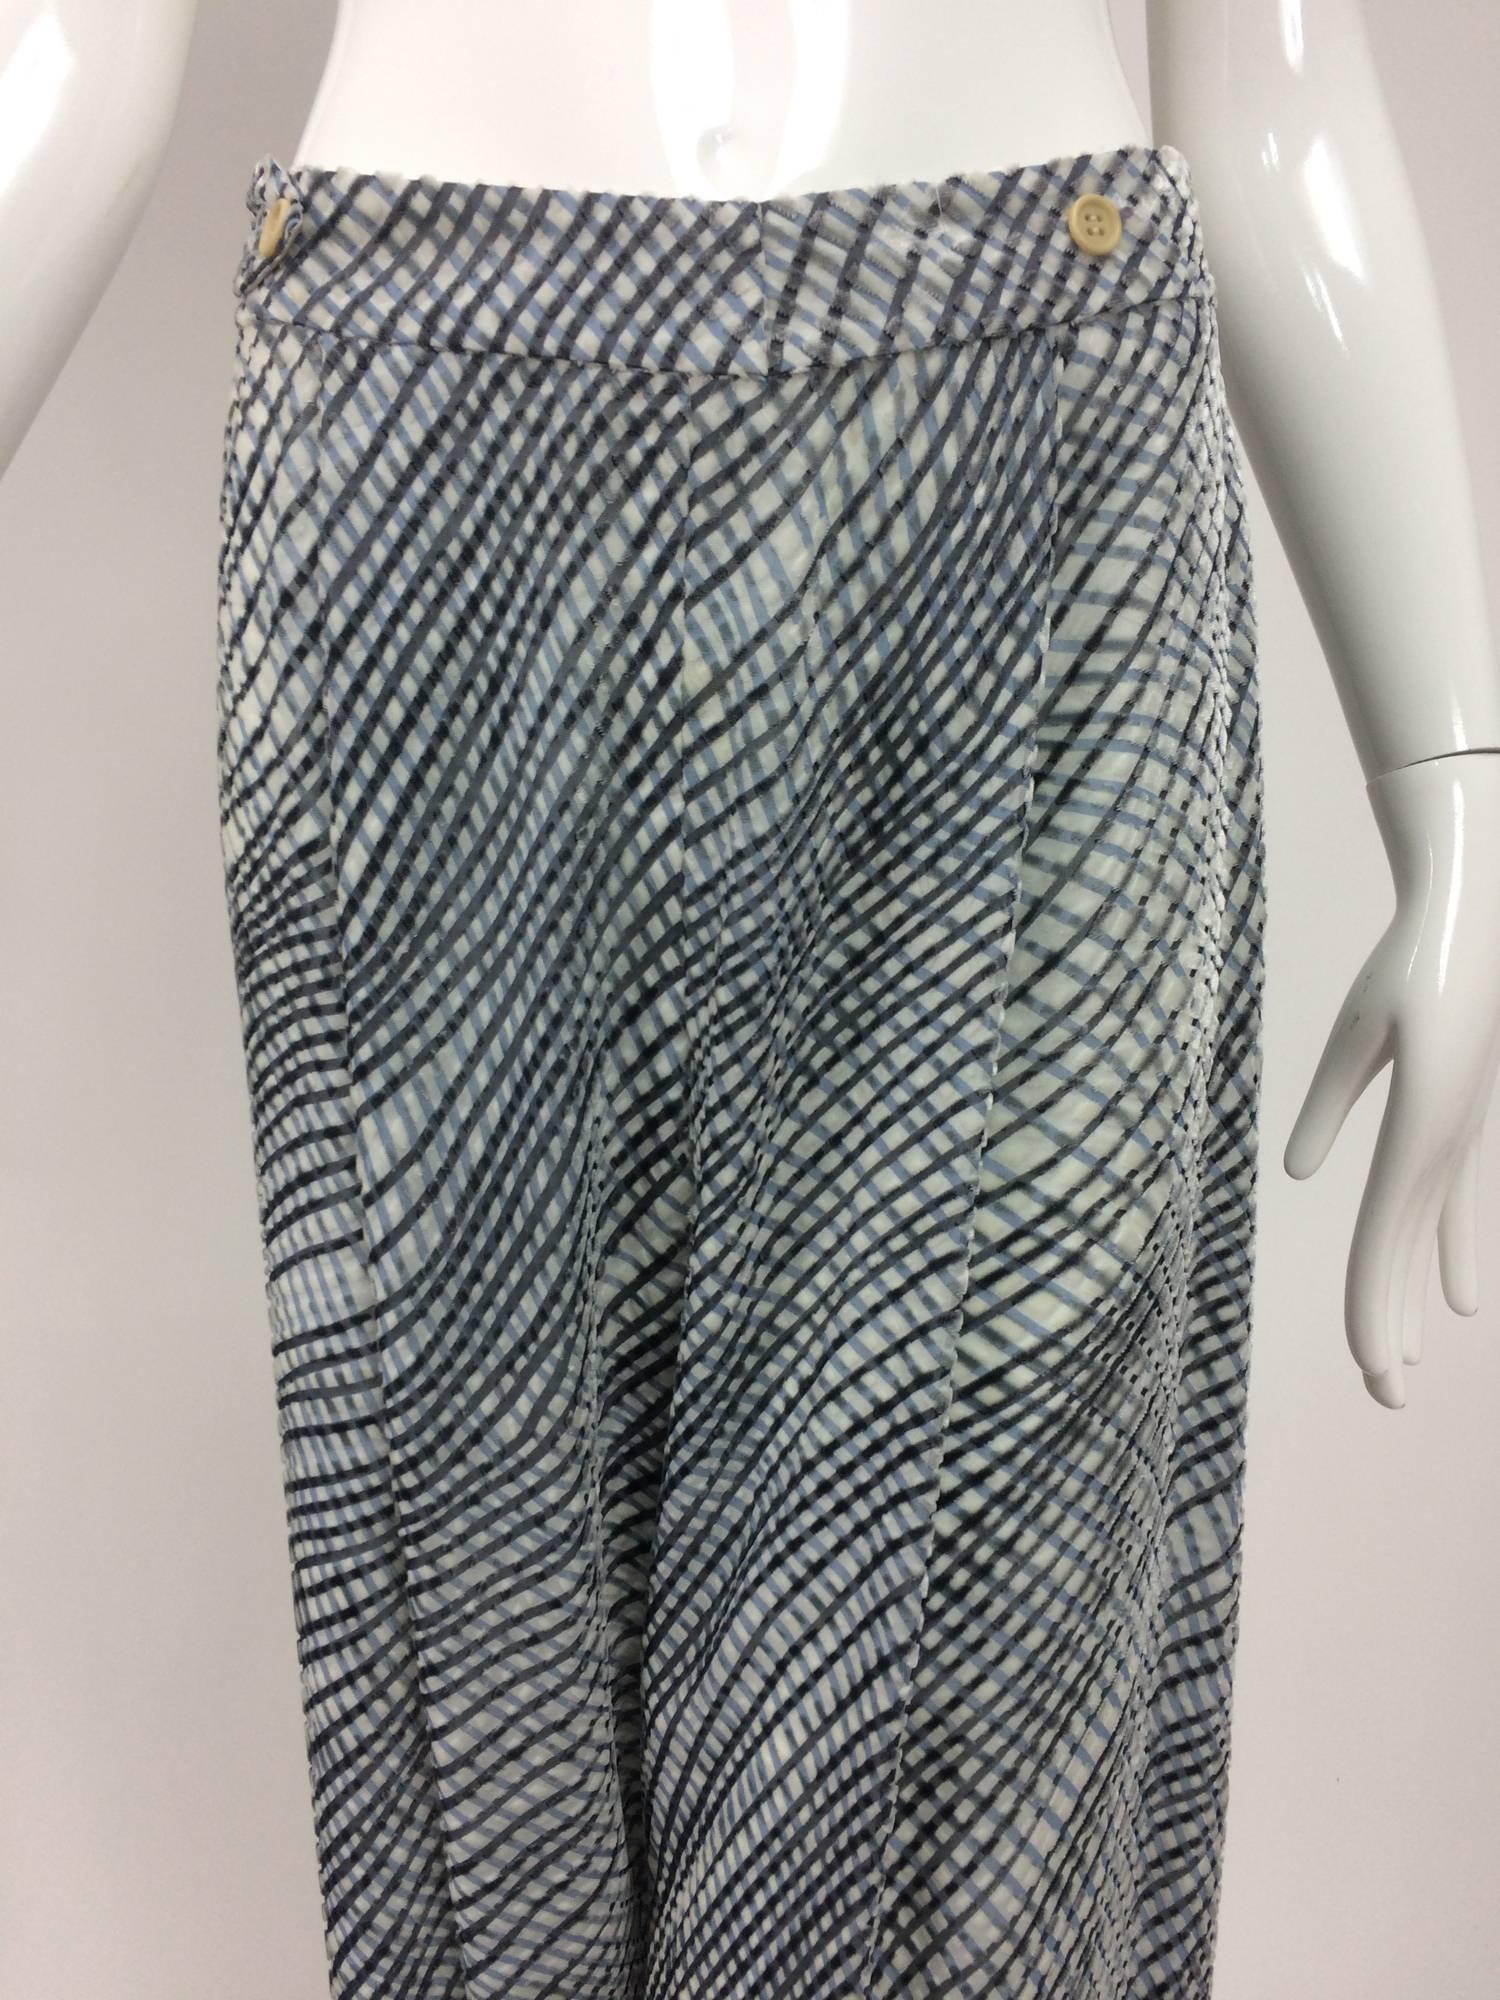 Giorgio Armani lattice pattern cut velvet wide leg trouser shades of gray...Wide leg trouser with side buttons and tabs at each waist side...Relaxed pleat at each front...Fully lined...Closes with a side zipper and buttons...Silk velvet with